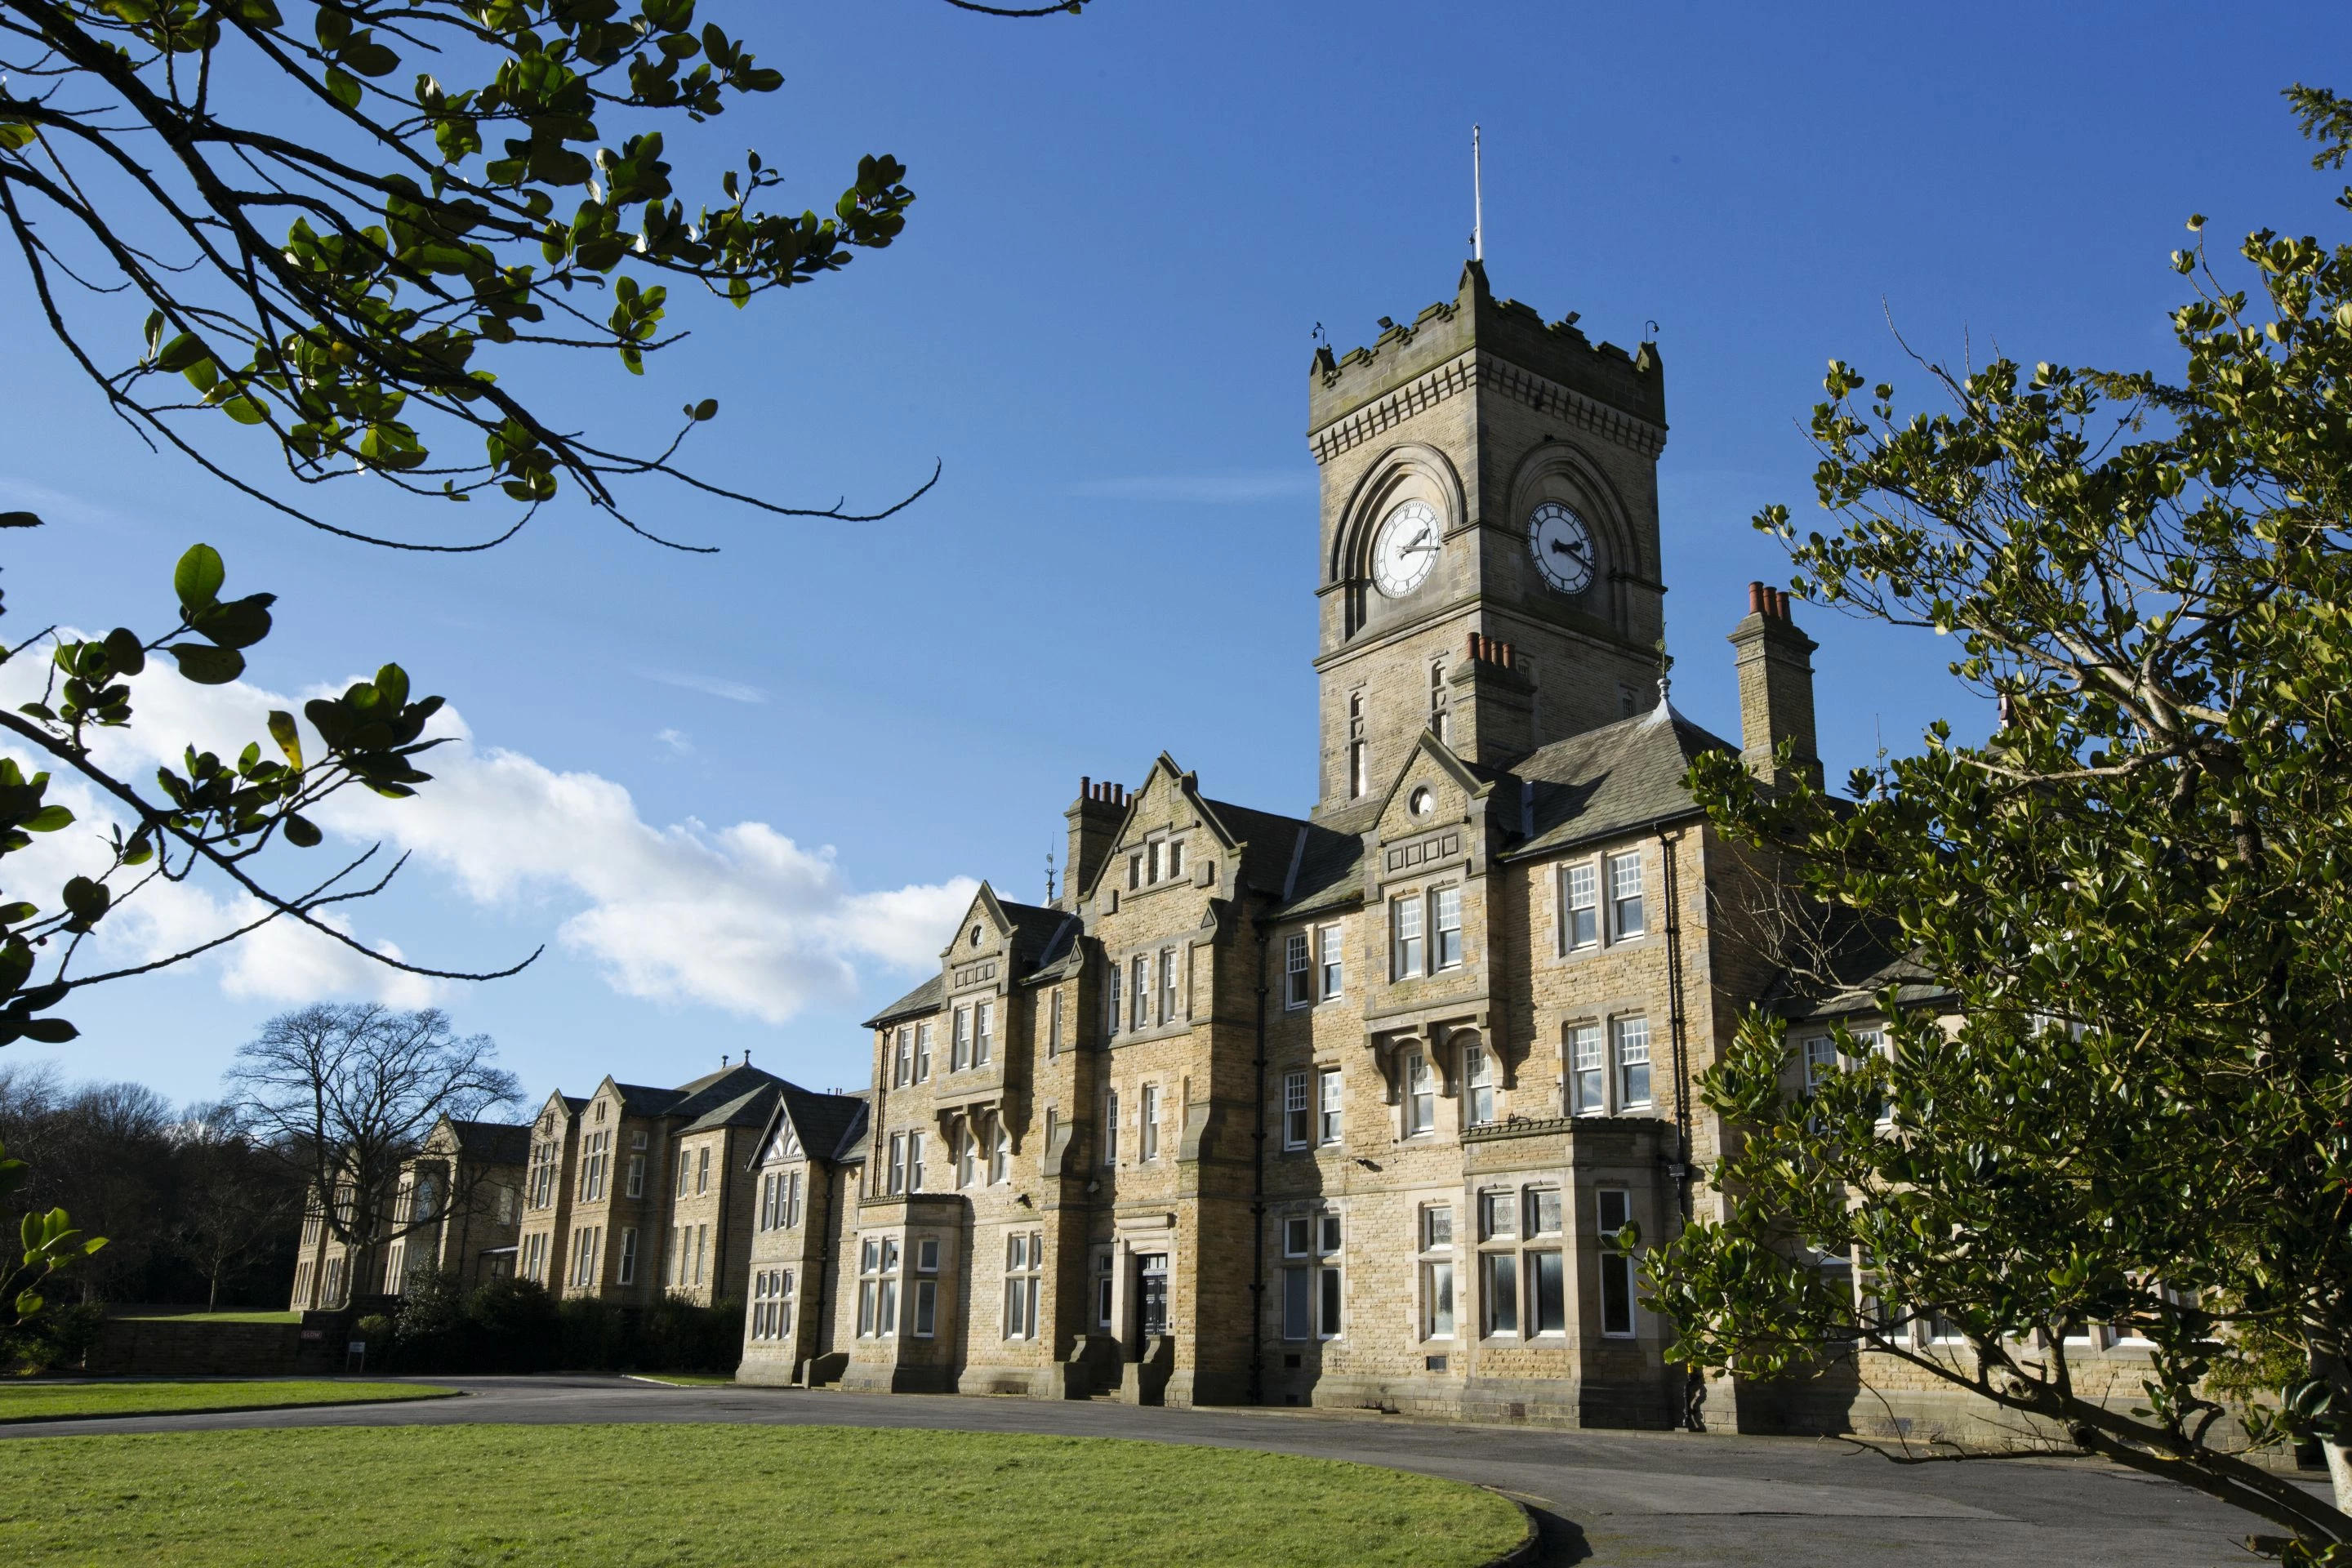 The Clock Tower at the Chevin Park scheme in Menston